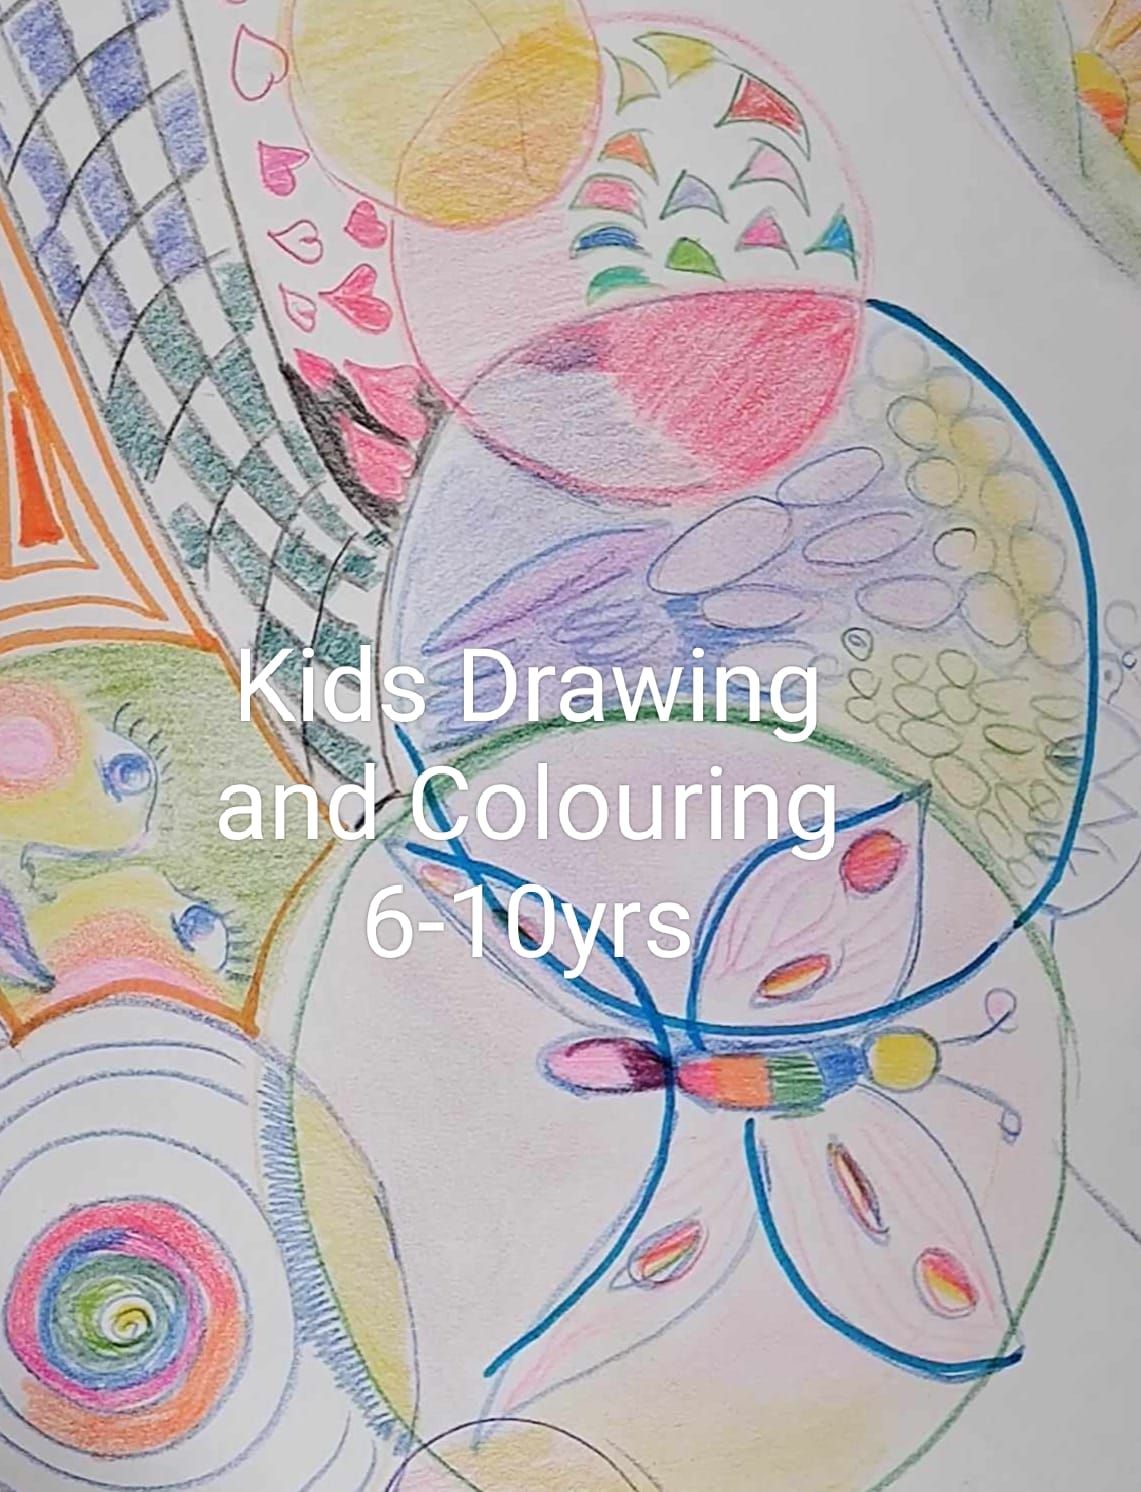 Kids Drawing and Pencil Colouring 6-10yrs 